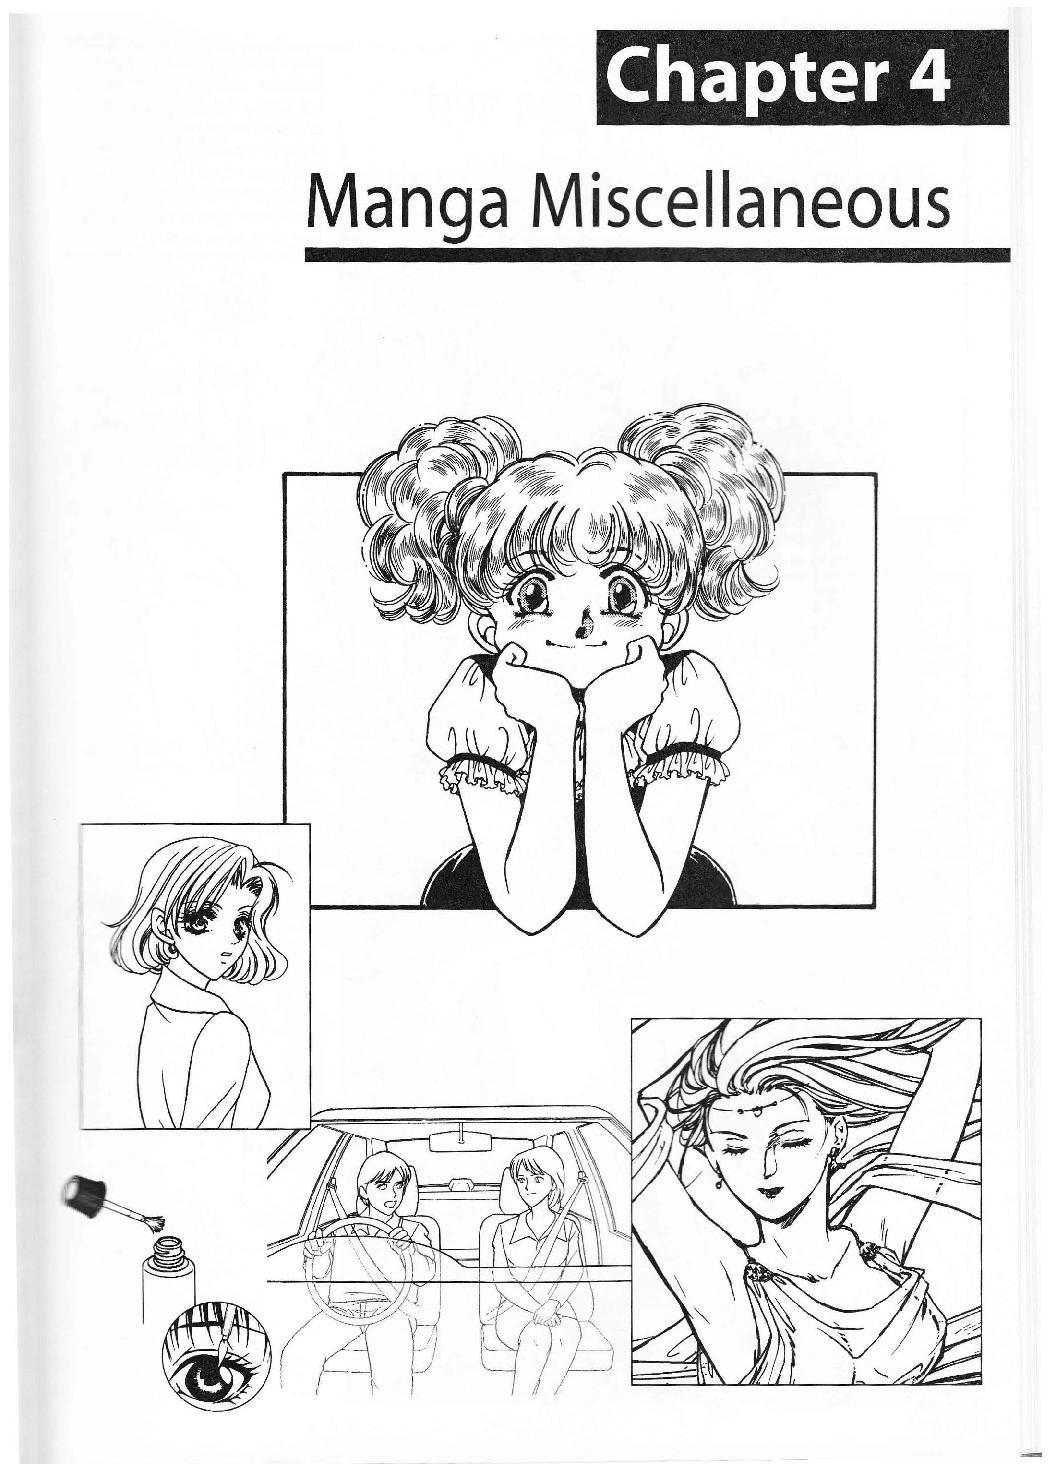 More How to Draw Manga Vol. 2 - Penning Characters 116